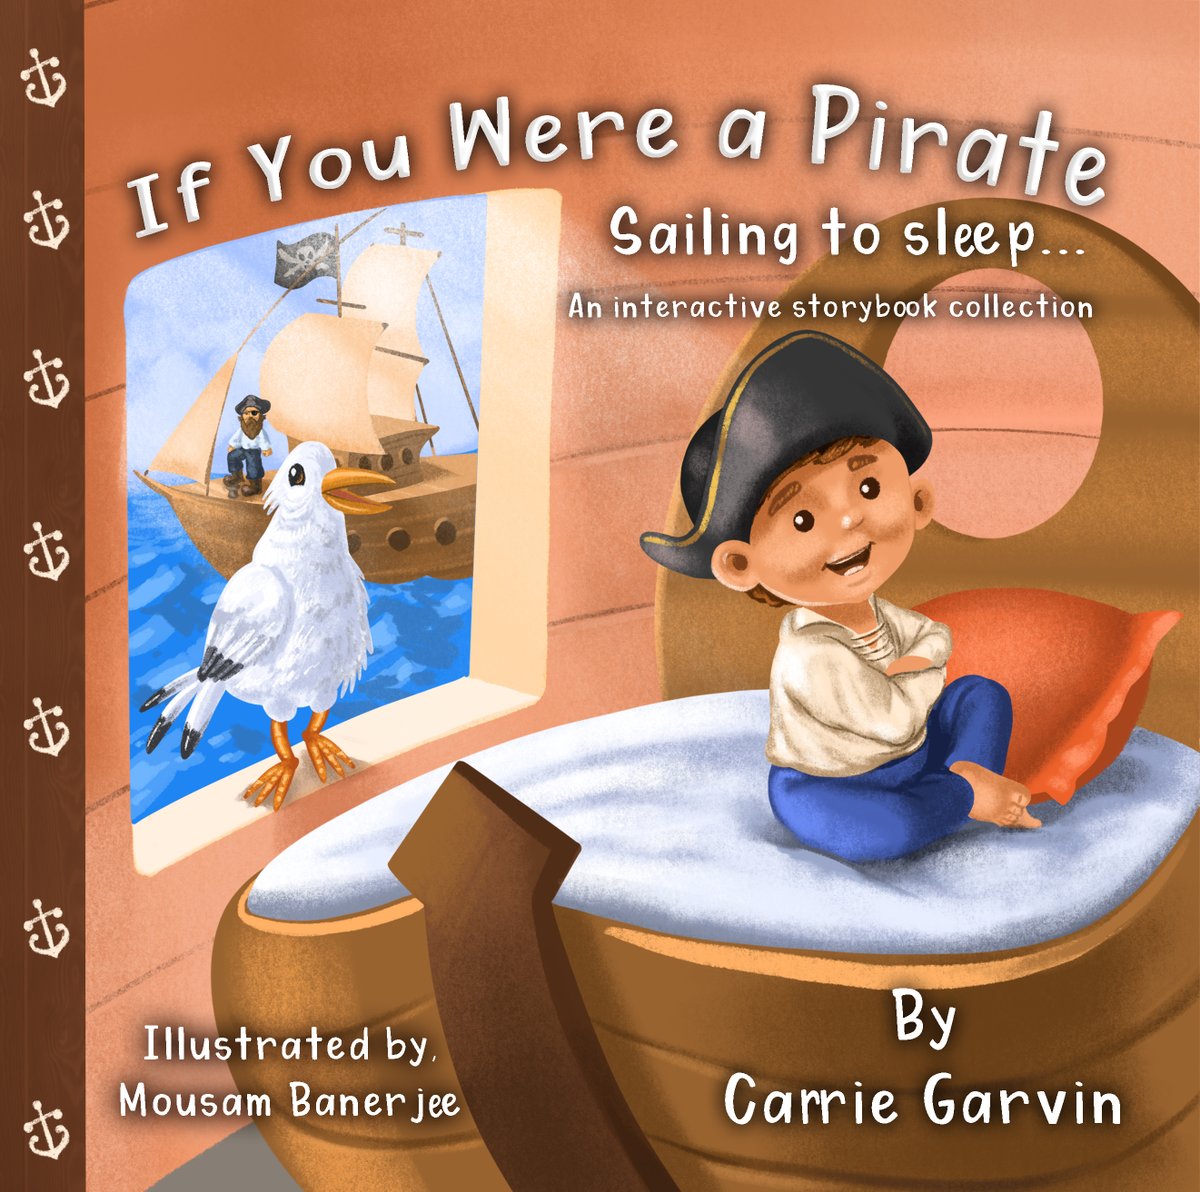 Sailing to Sleep-An interactive storybook collection By Carrie Garvin amzn.to/3iKDOqw If You Were an Elf If You Were a Pirate If I Wear a Face Mask-Can I Still Be Me? If You Were A Monster If You Were a Pirate If I Were a Mermaid #writingcommunity #ChildrensBooks #books